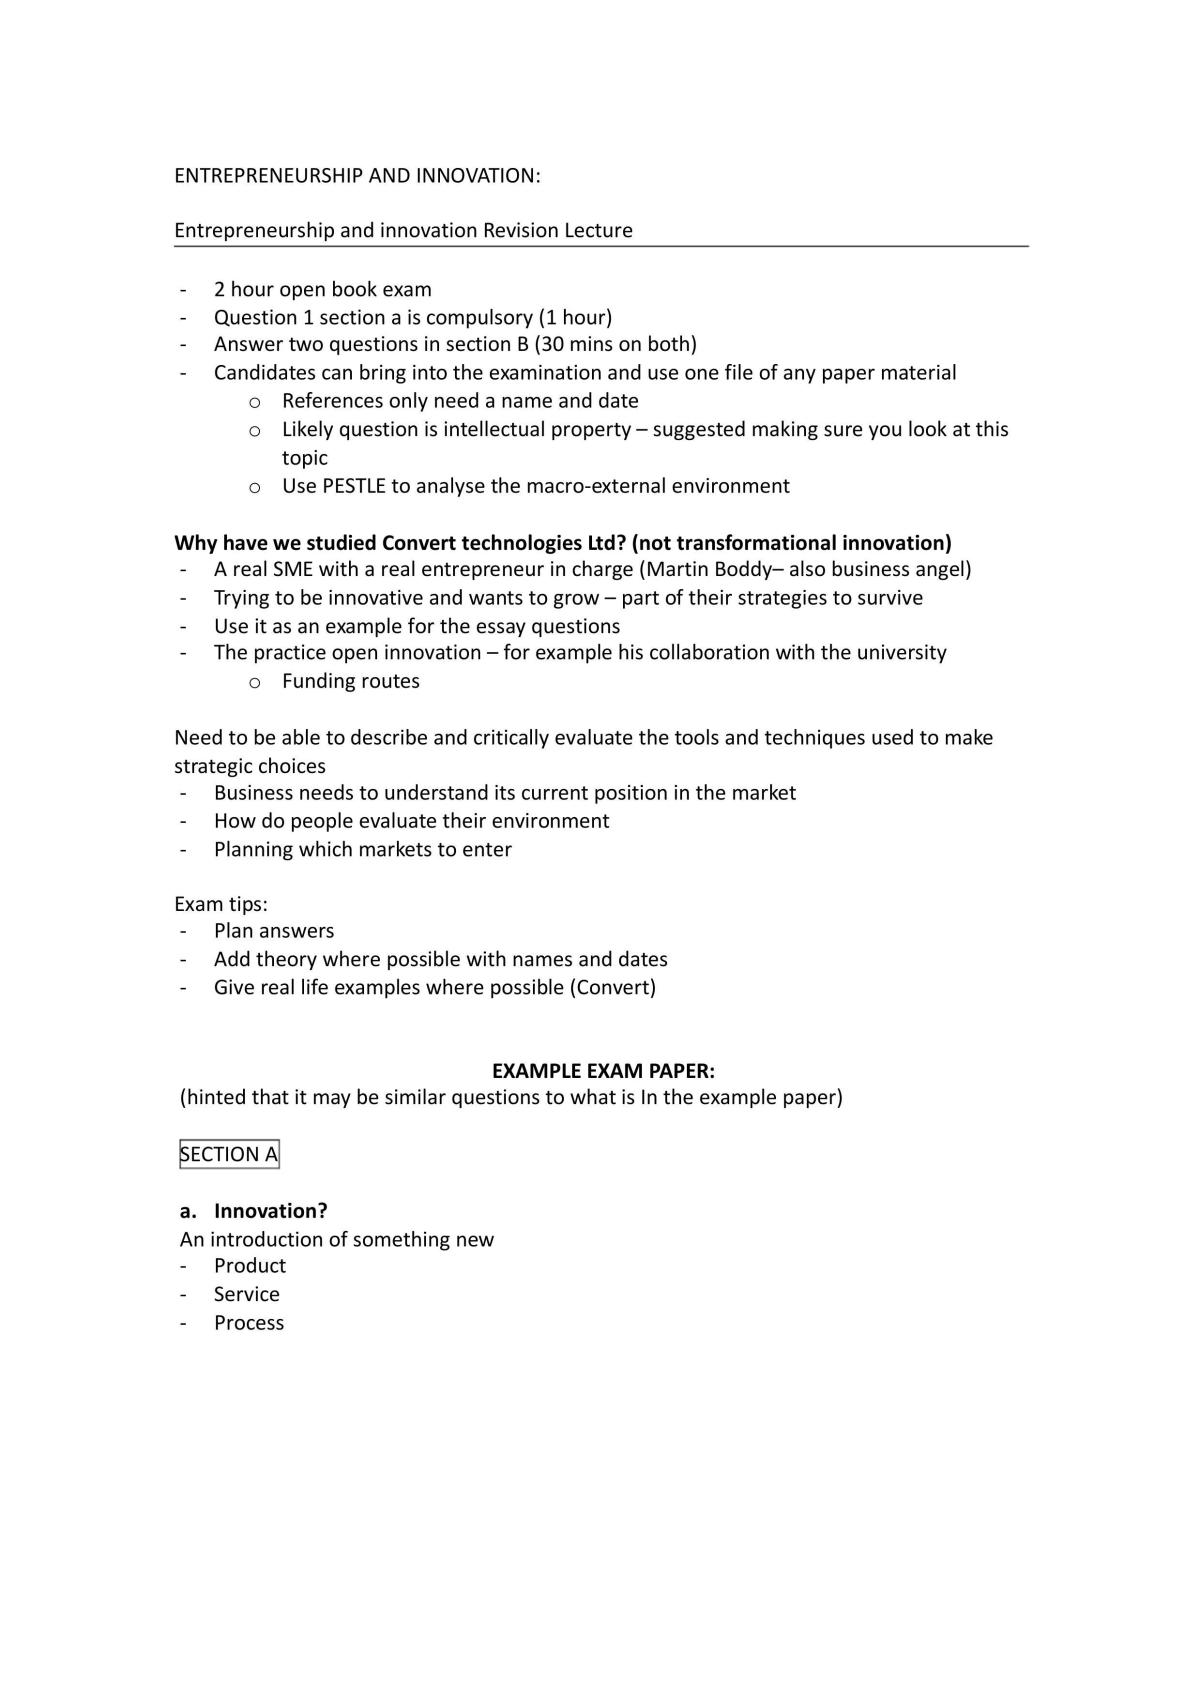 Entrepreneurship and Innovation Study Guide - Page 1